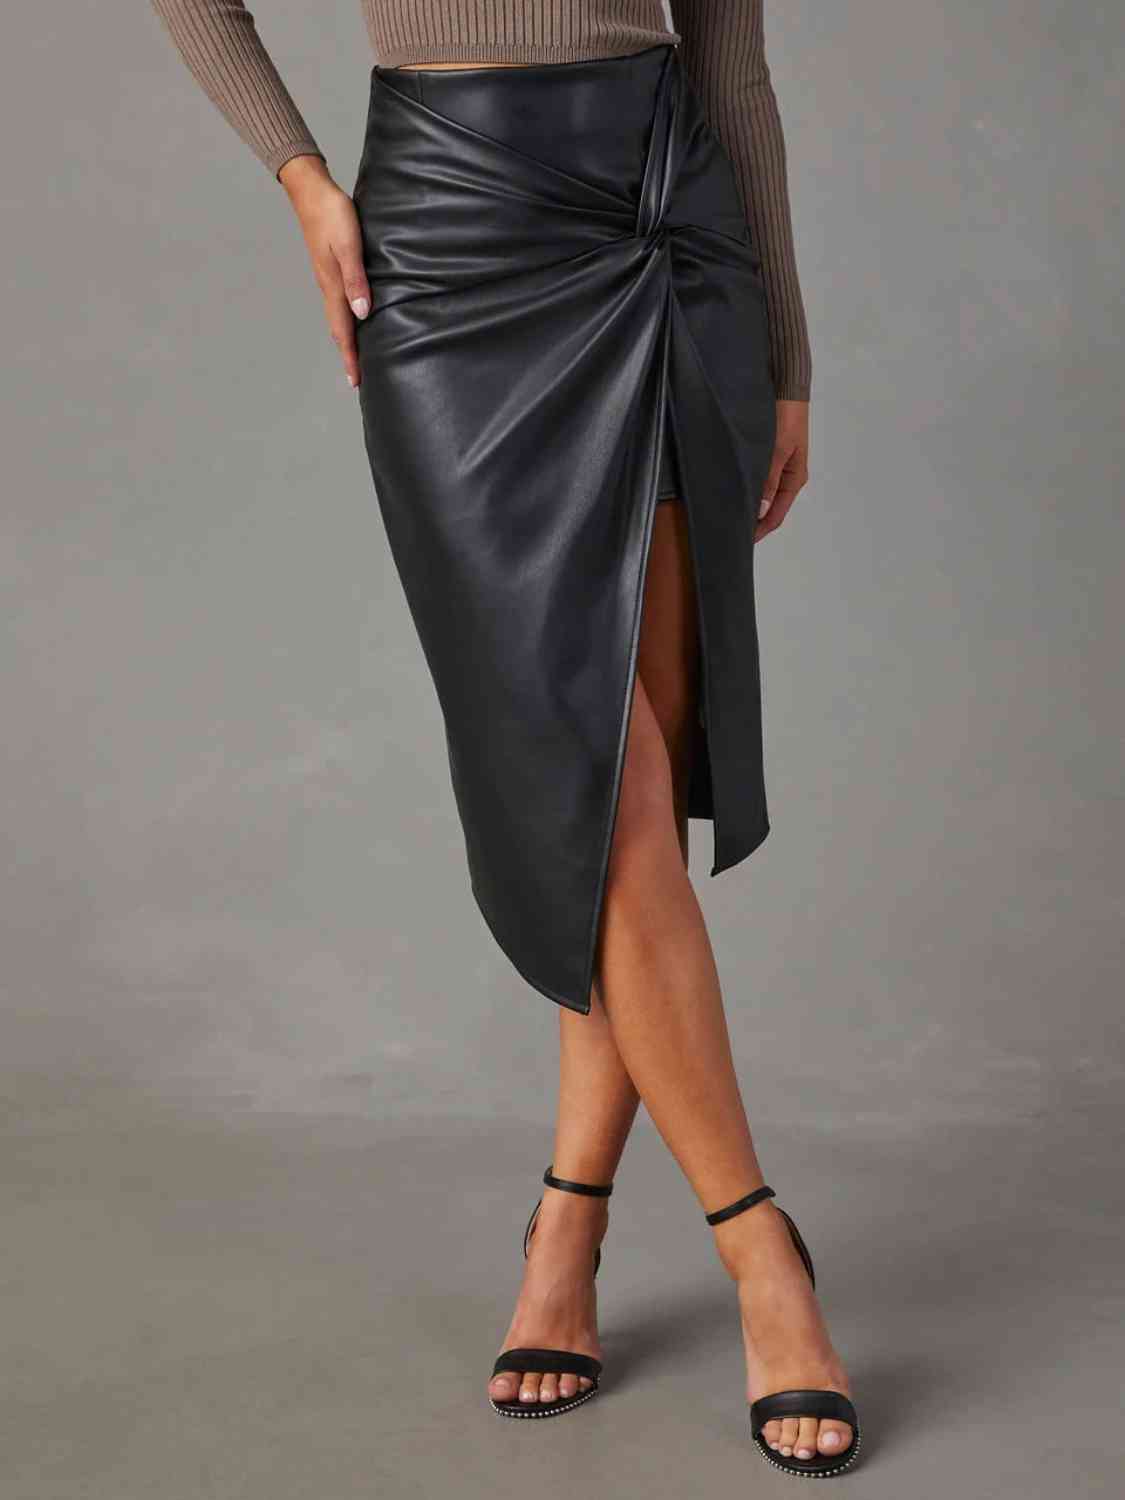 Black Faux Leather High Waist Ruched Pencil Skirt - Hot Miami Styles